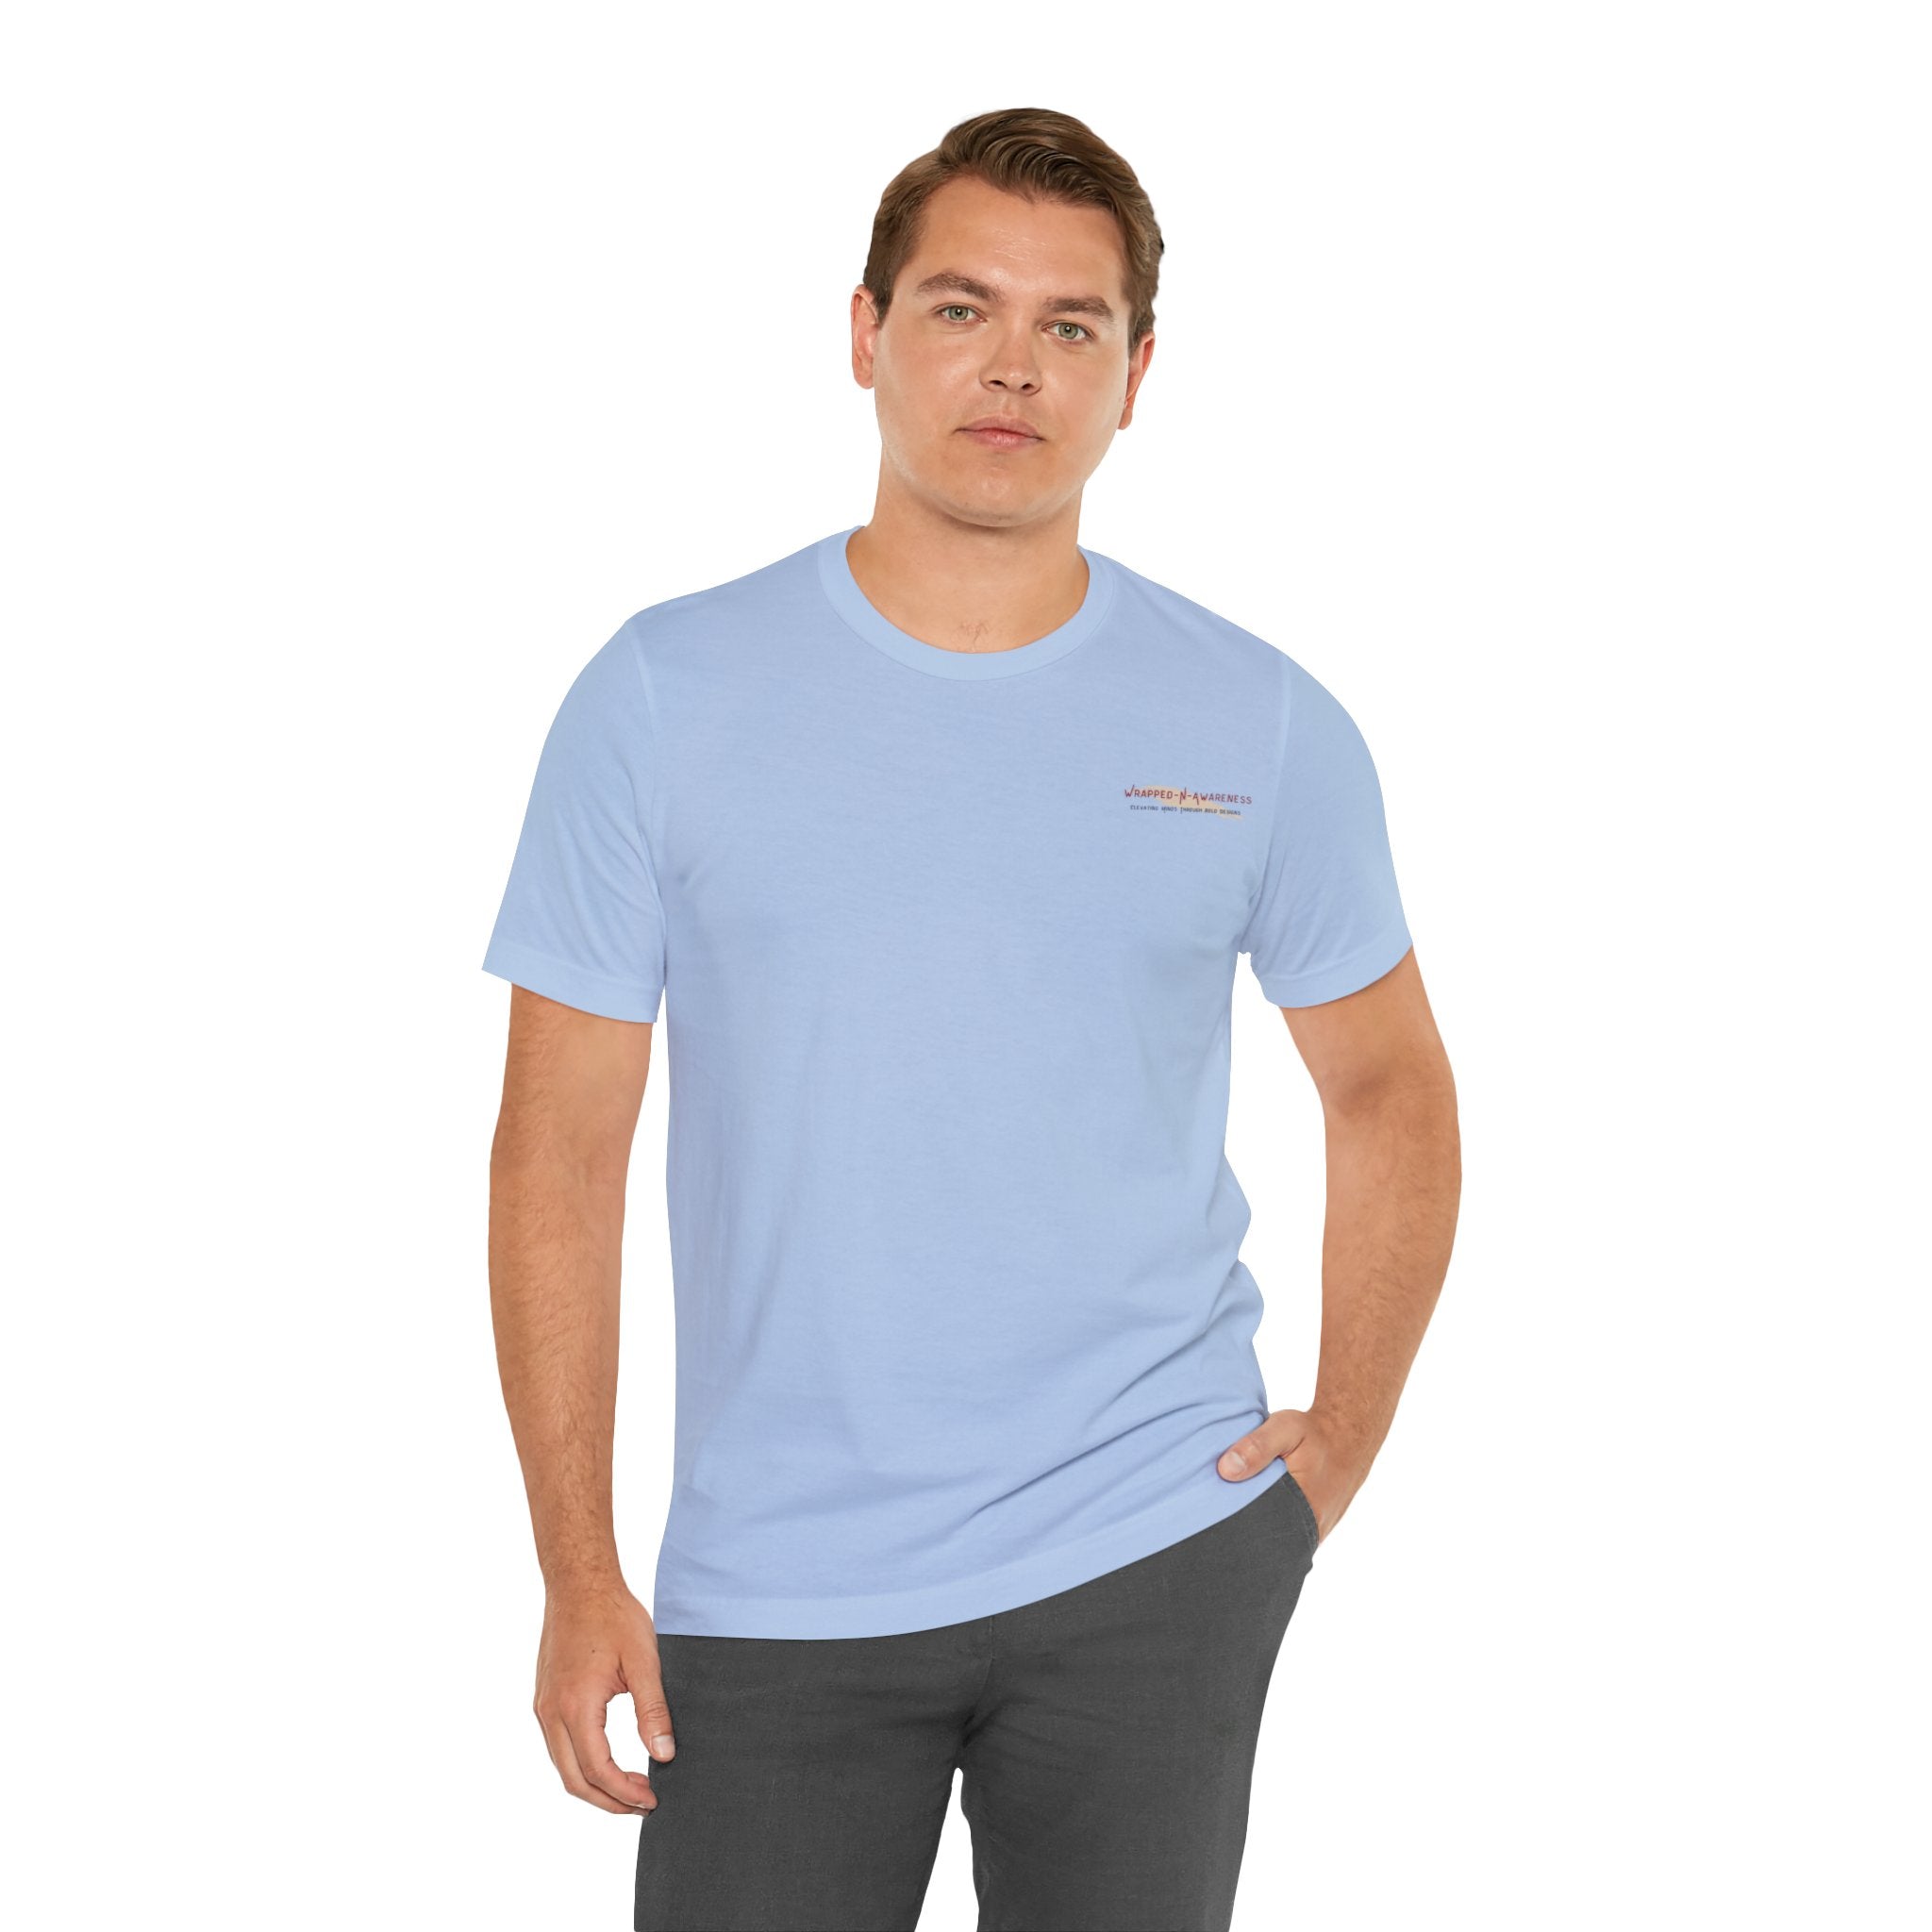 Mindfulness Heals Wounds Tee - Bella+Canvas 3001 Turquoise Airlume Cotton Bella+Canvas 3001 Crew Neckline Jersey Short Sleeve Lightweight Fabric Mental Health Support Retail Fit Tear-away Label Tee Unisex Tee T-Shirt 16721993368939581410_2048 Printify